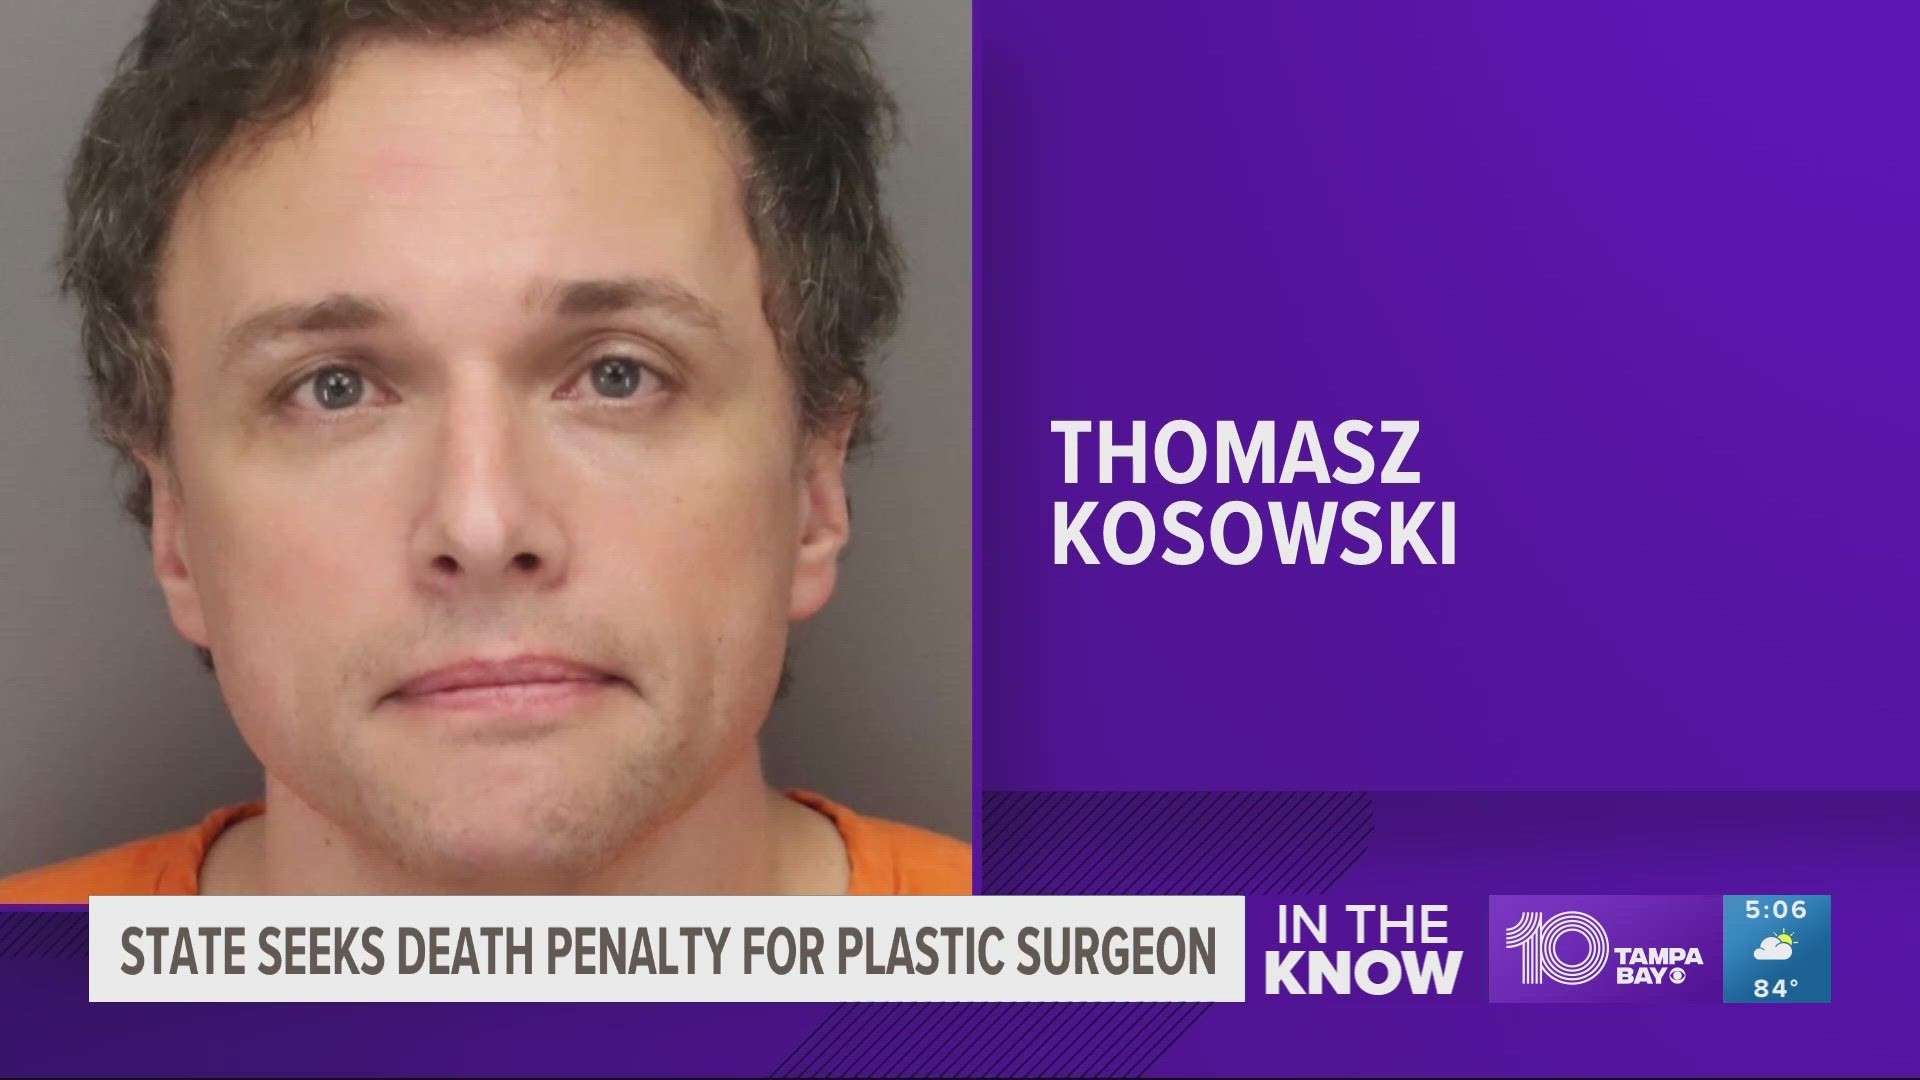 Tomasz Kosowski, 44, was arrested and charged with first-degree murder back in March.